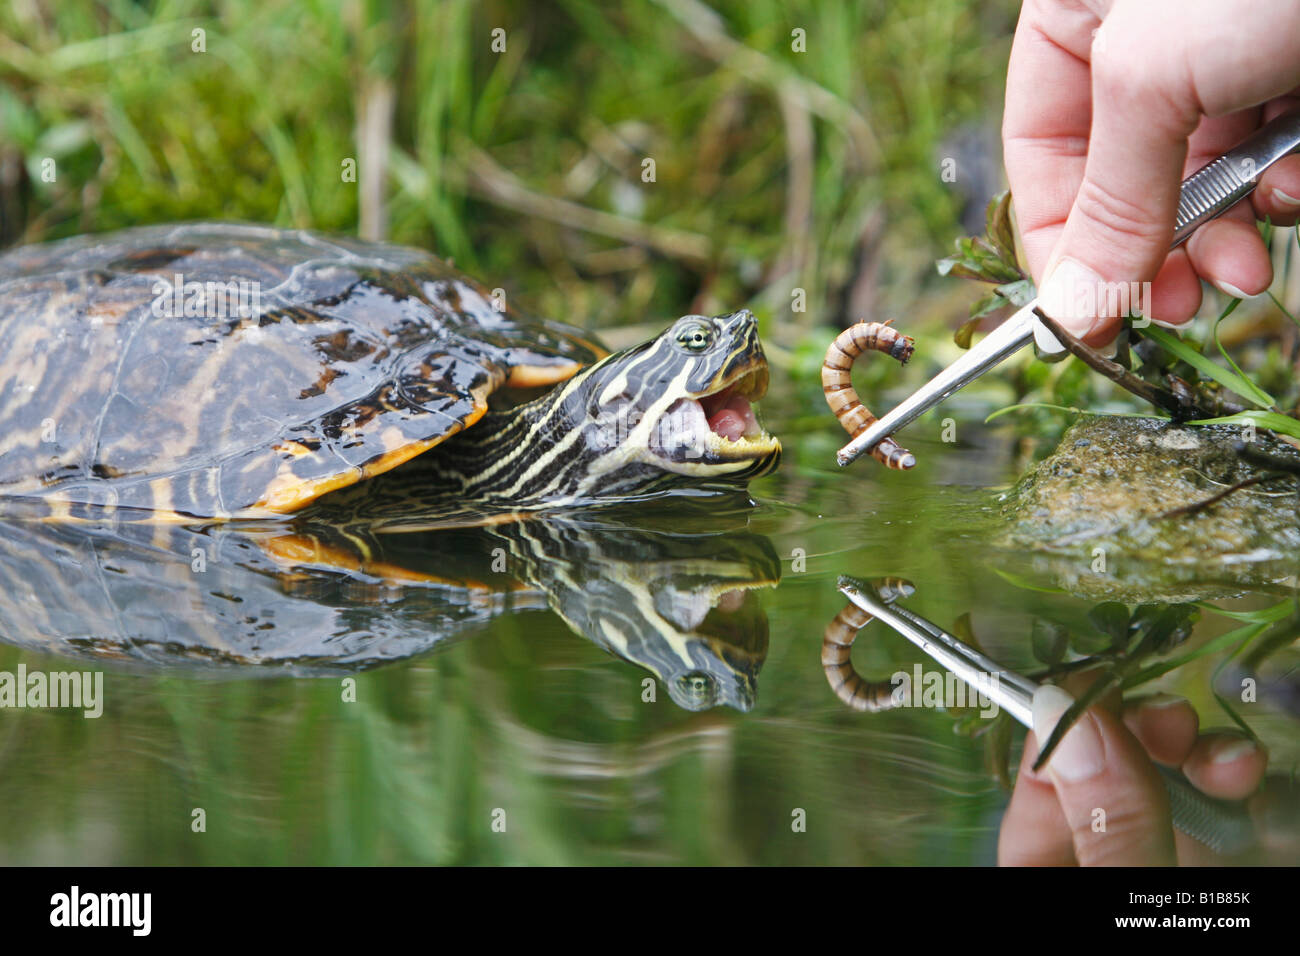 Hieroglyphic river cooter getting food / Pseudemys concinna hieroglyphica Stock Photo